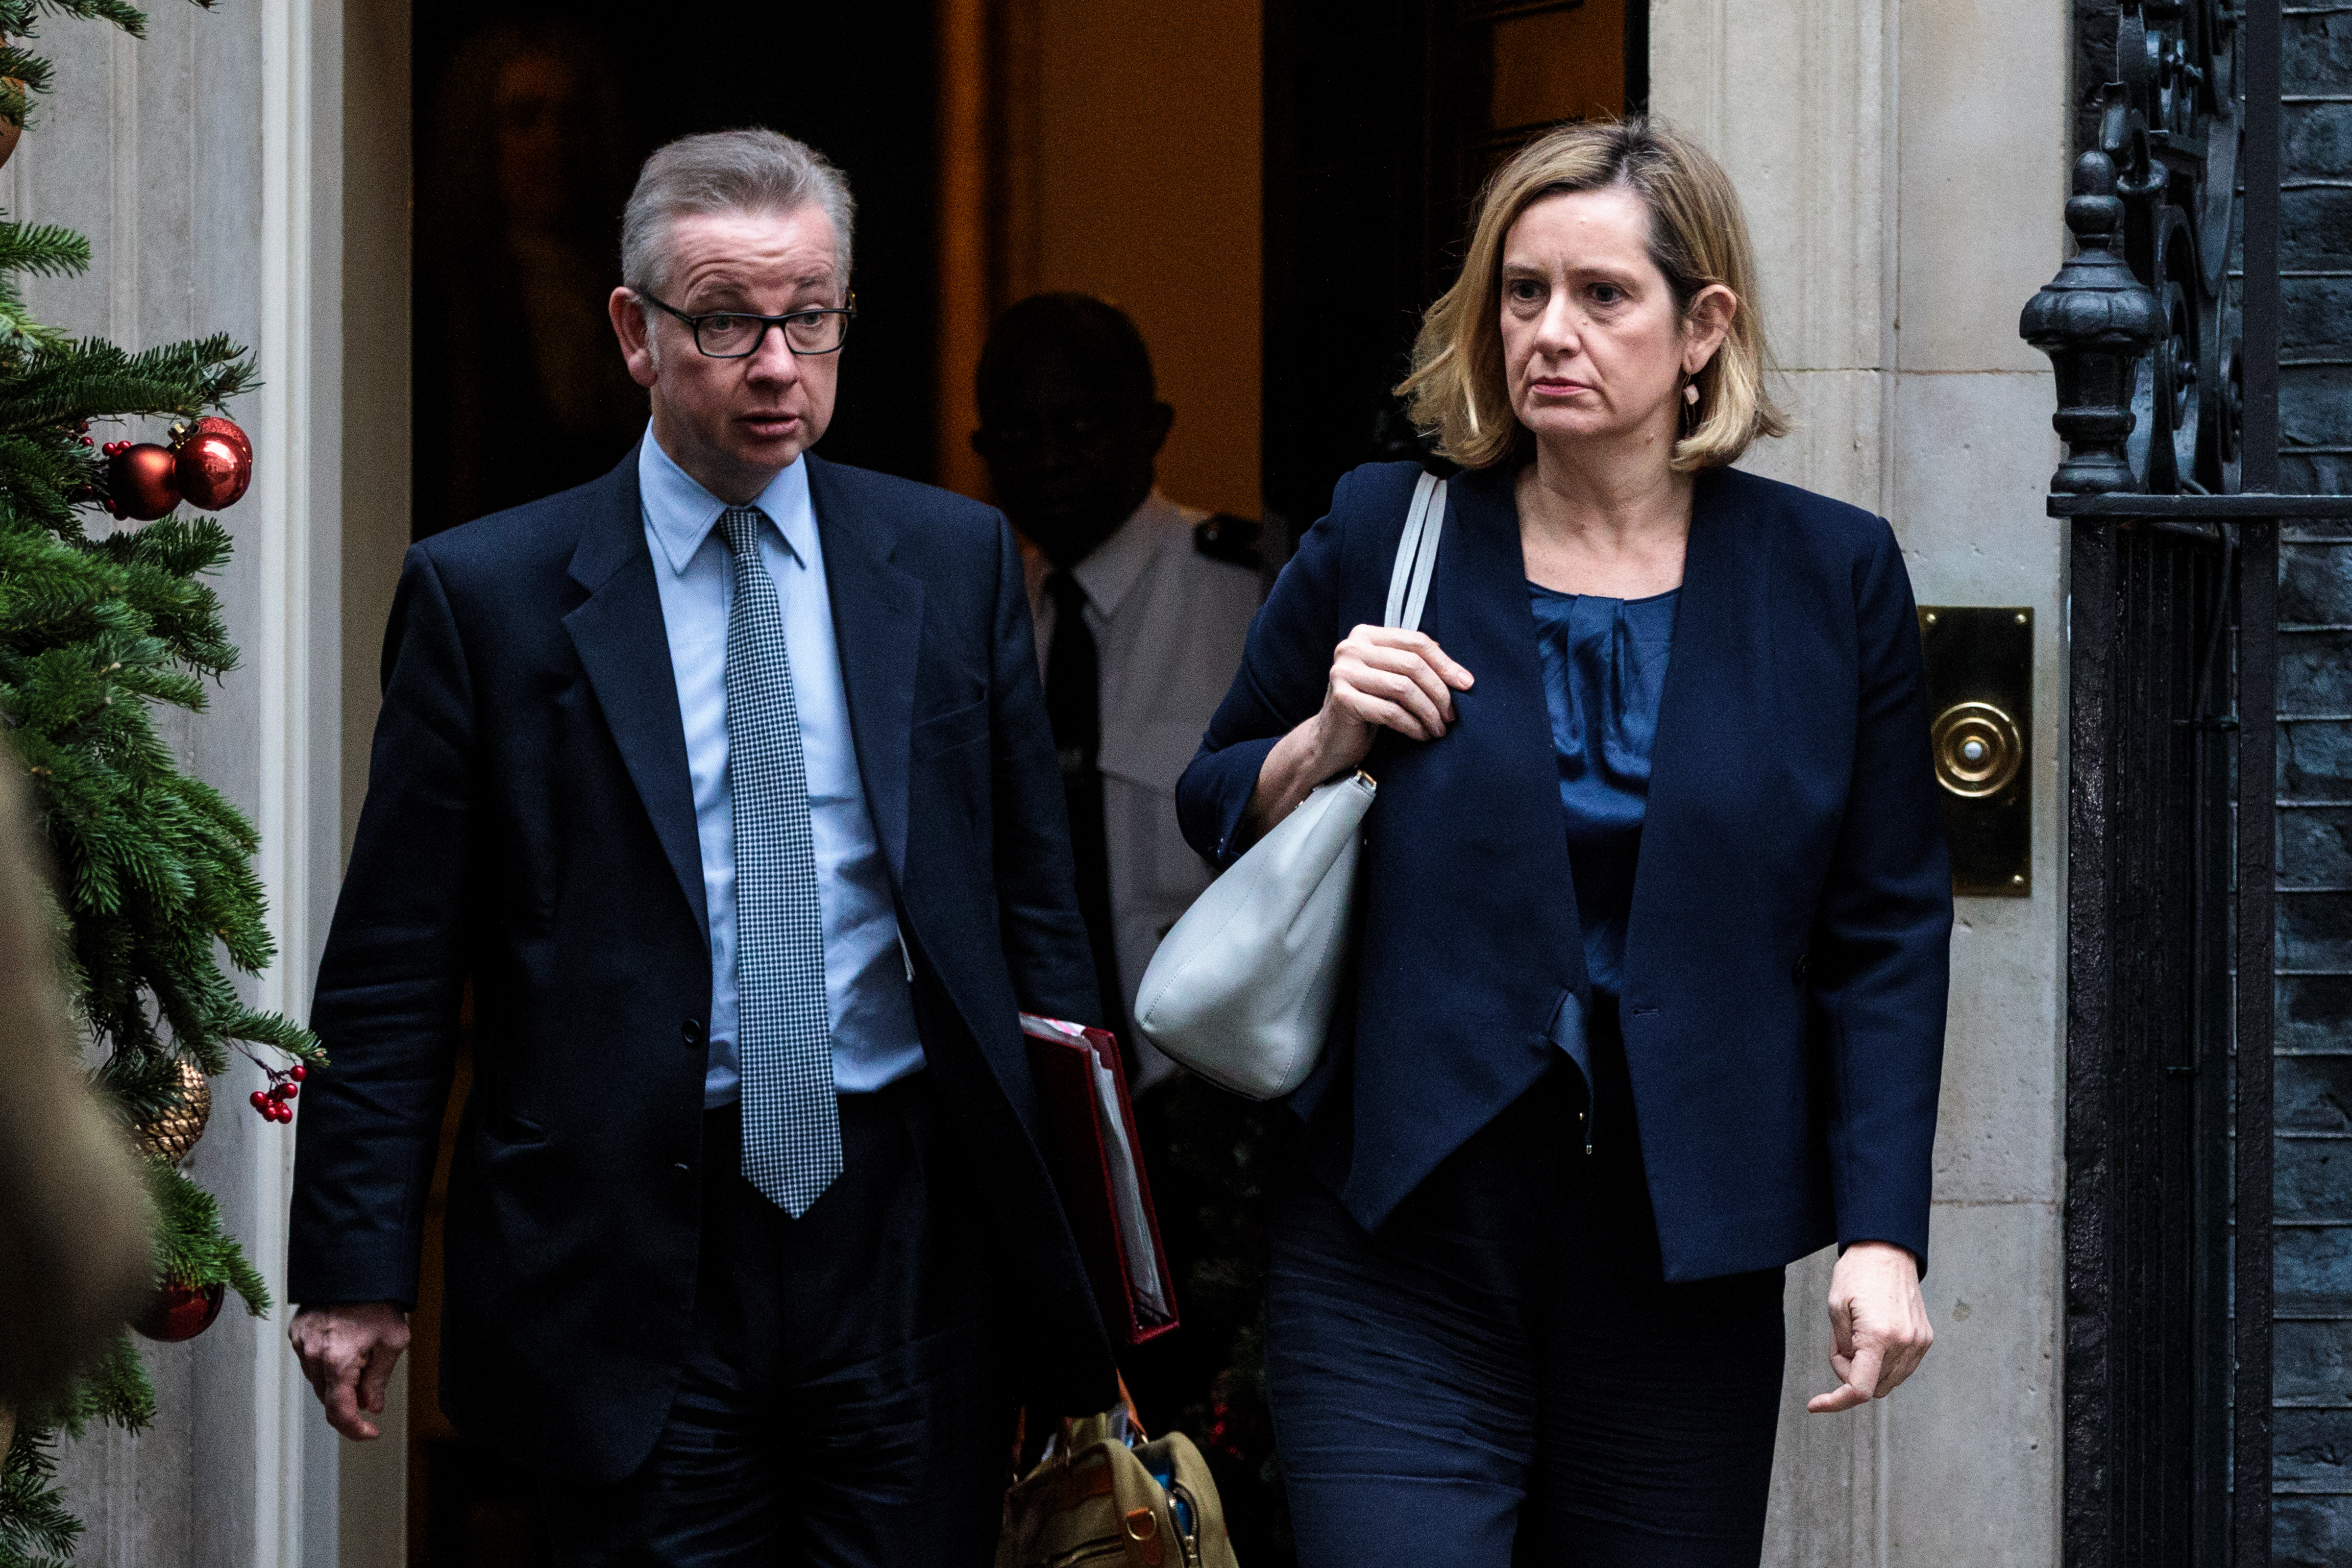 Environment Secretary Michael Gove and Secretary for the Department for Work and Pensions Amber Rudd leave Number 10 Downing Street following a meeting of cabinet ministers on December 06, 2018 in London, England. 